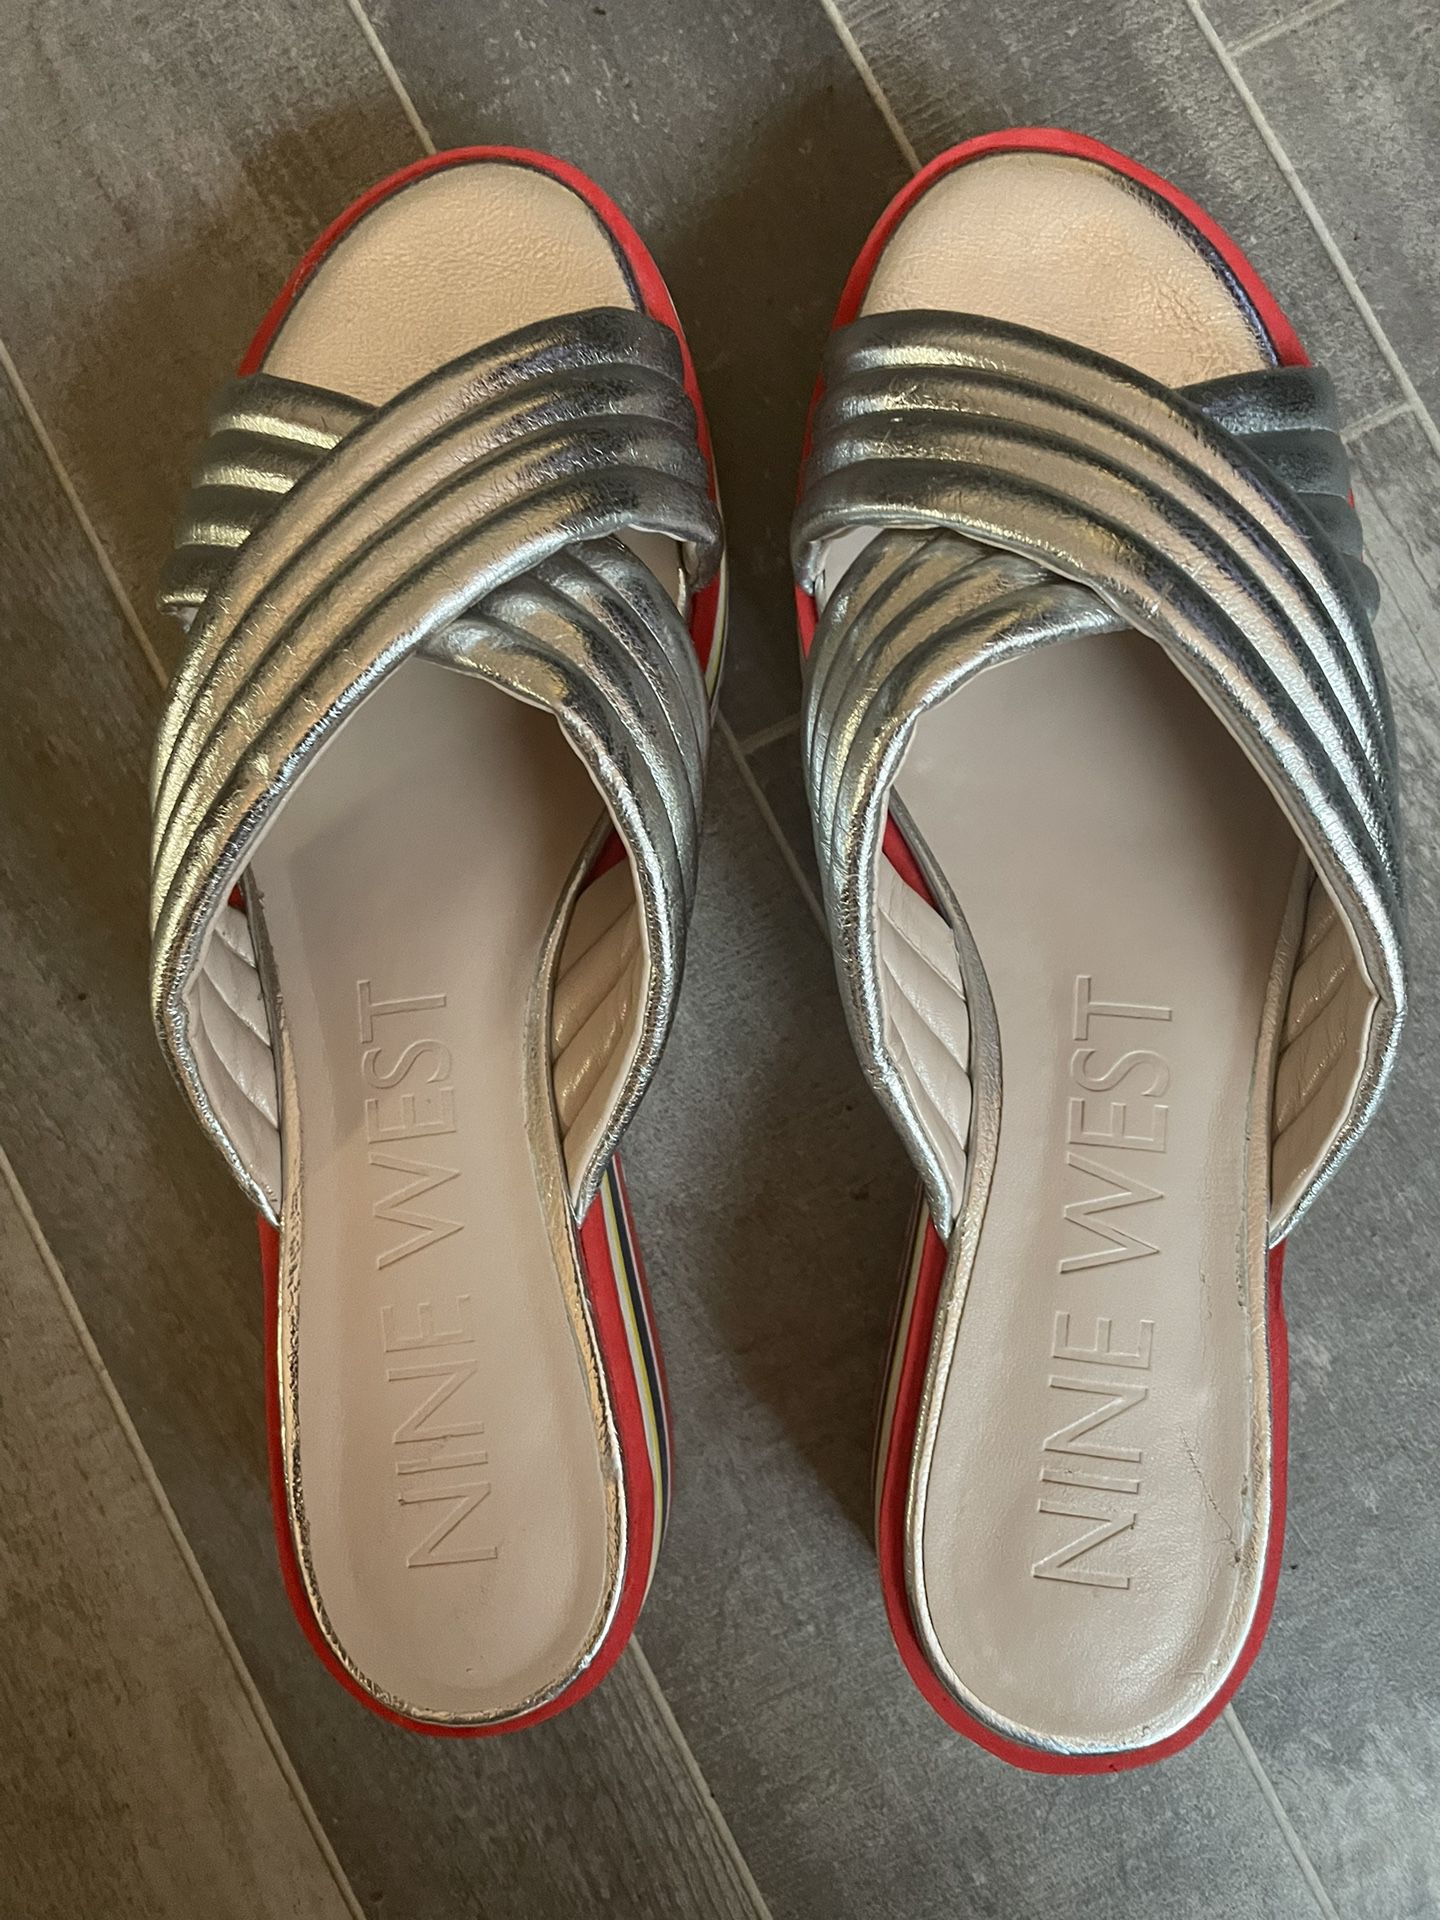 nine west Silver wedge sandals 11M Colorful Sole’s